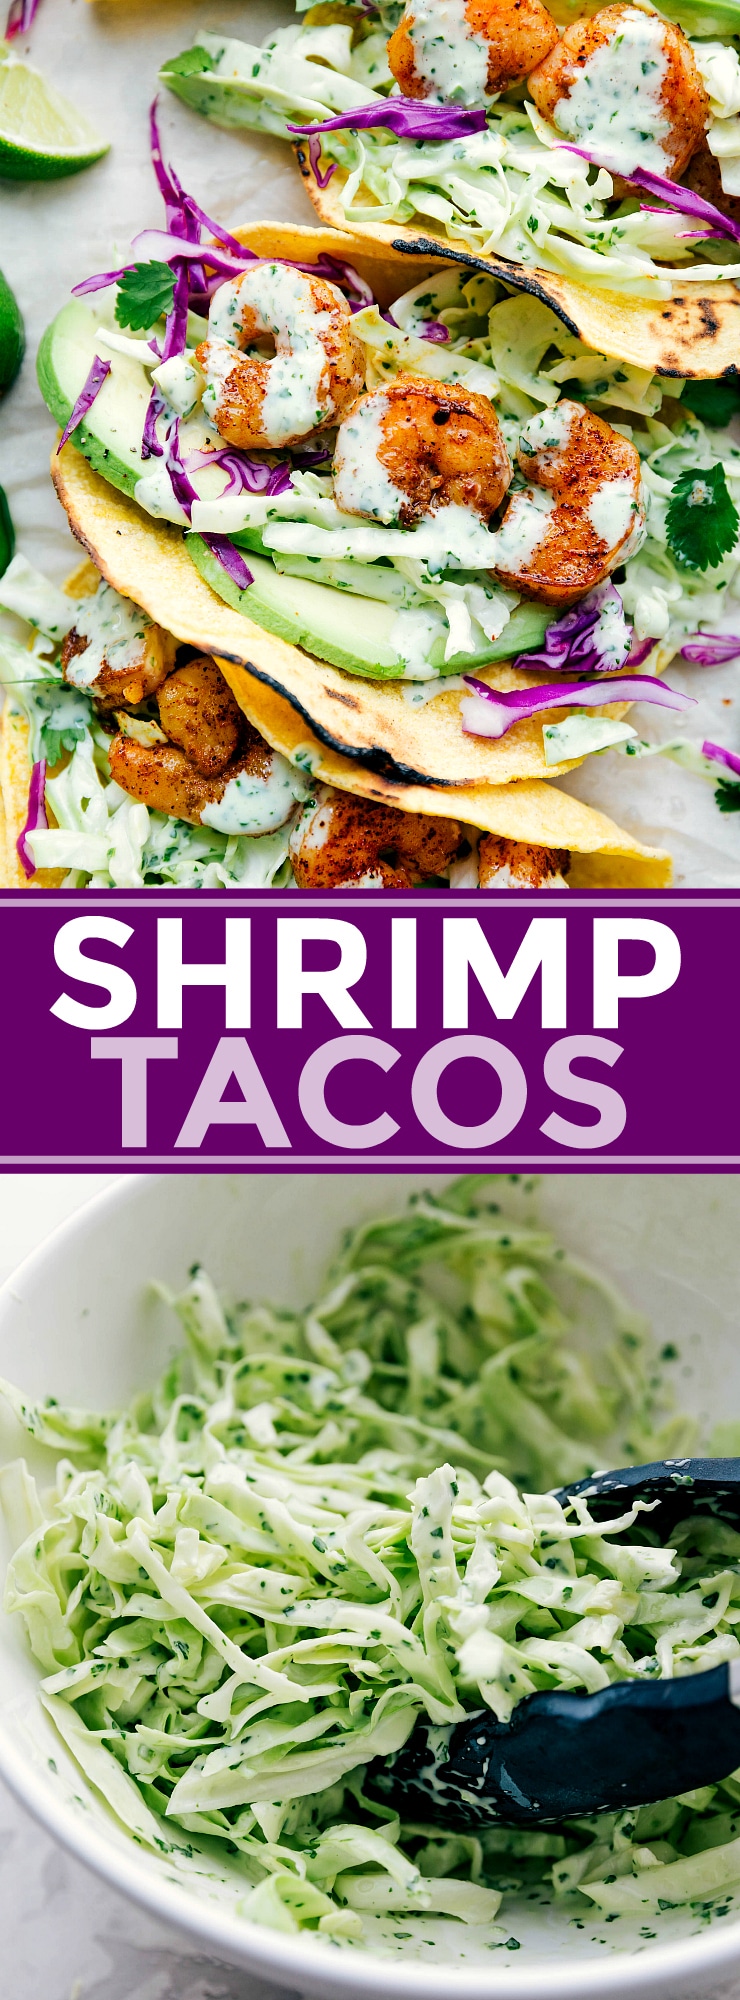 Perfectly seasoned shrimp with cilantro-lime slaw and fresh avocado all packed in a tortilla. These shrimp tacos can be ready in 30 minutes or less! (Plus, prep ahead tips!) via chelseasmessyapron.com #shrimp #taco #easy #quick #healthy #fast #recipe #meal #cilantro #lime #avocado #guacamole #tacos